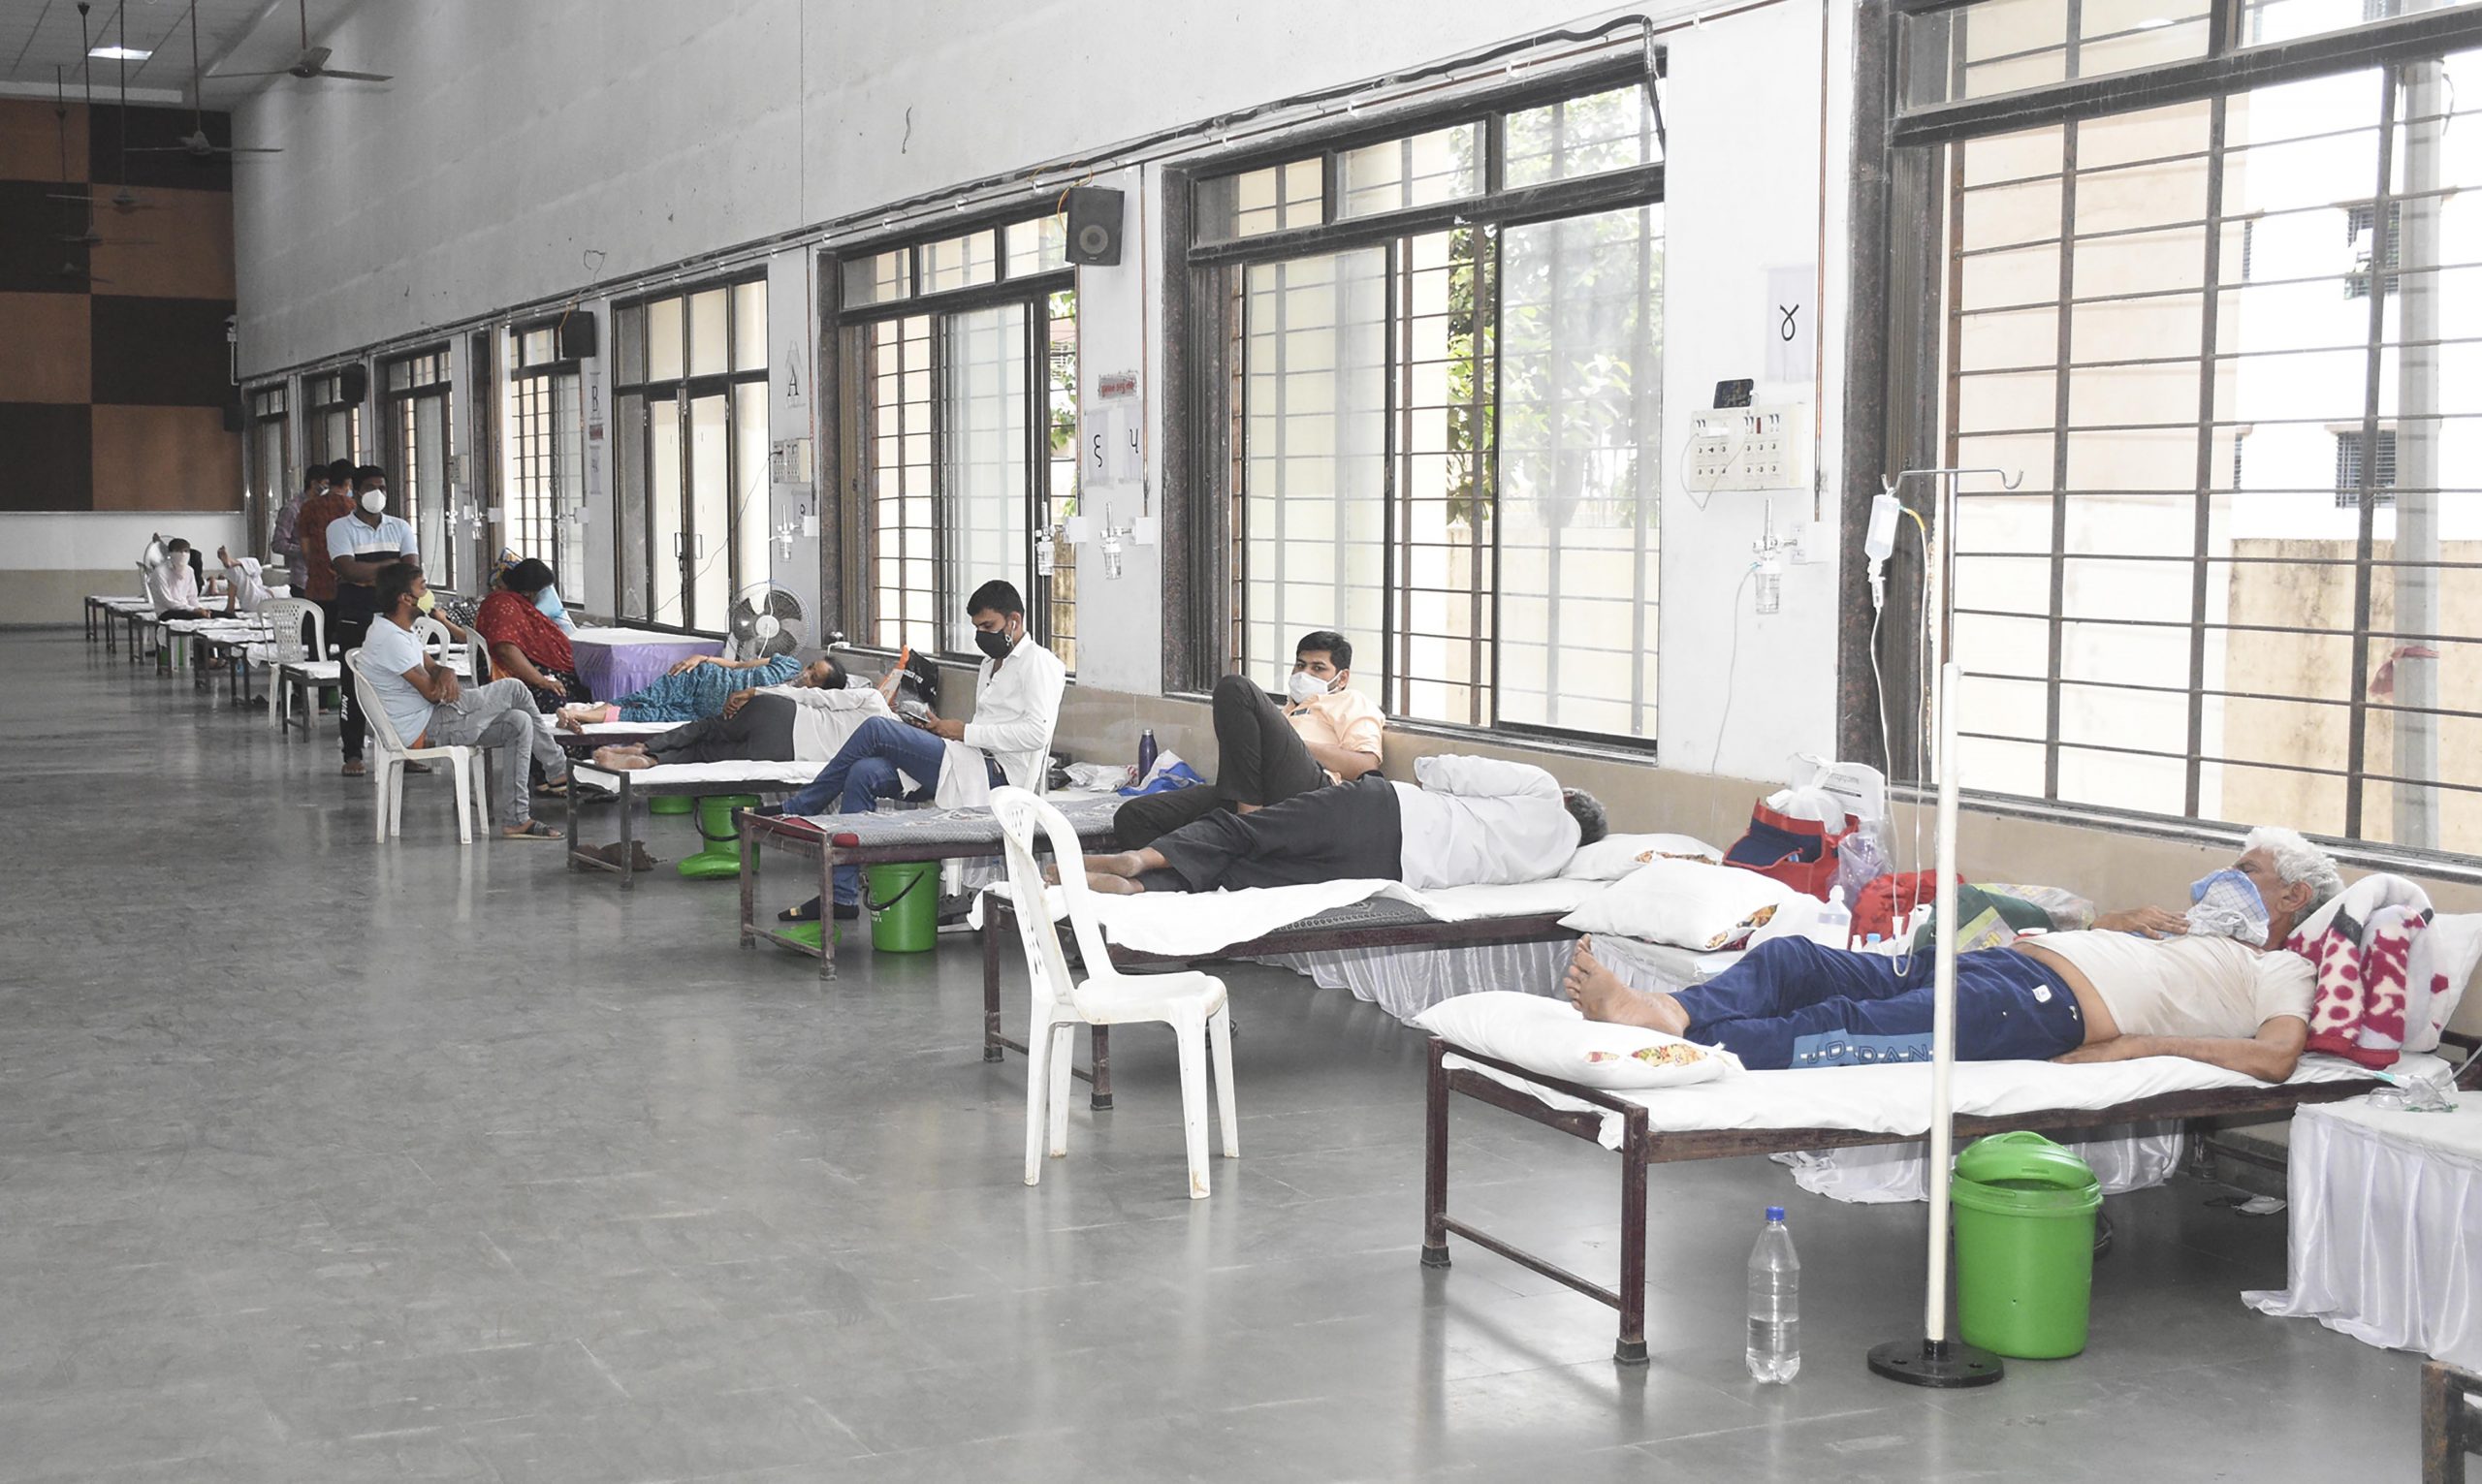 India records 352,991 COVID-19 cases, 2,812 deaths, in highest single-day spike